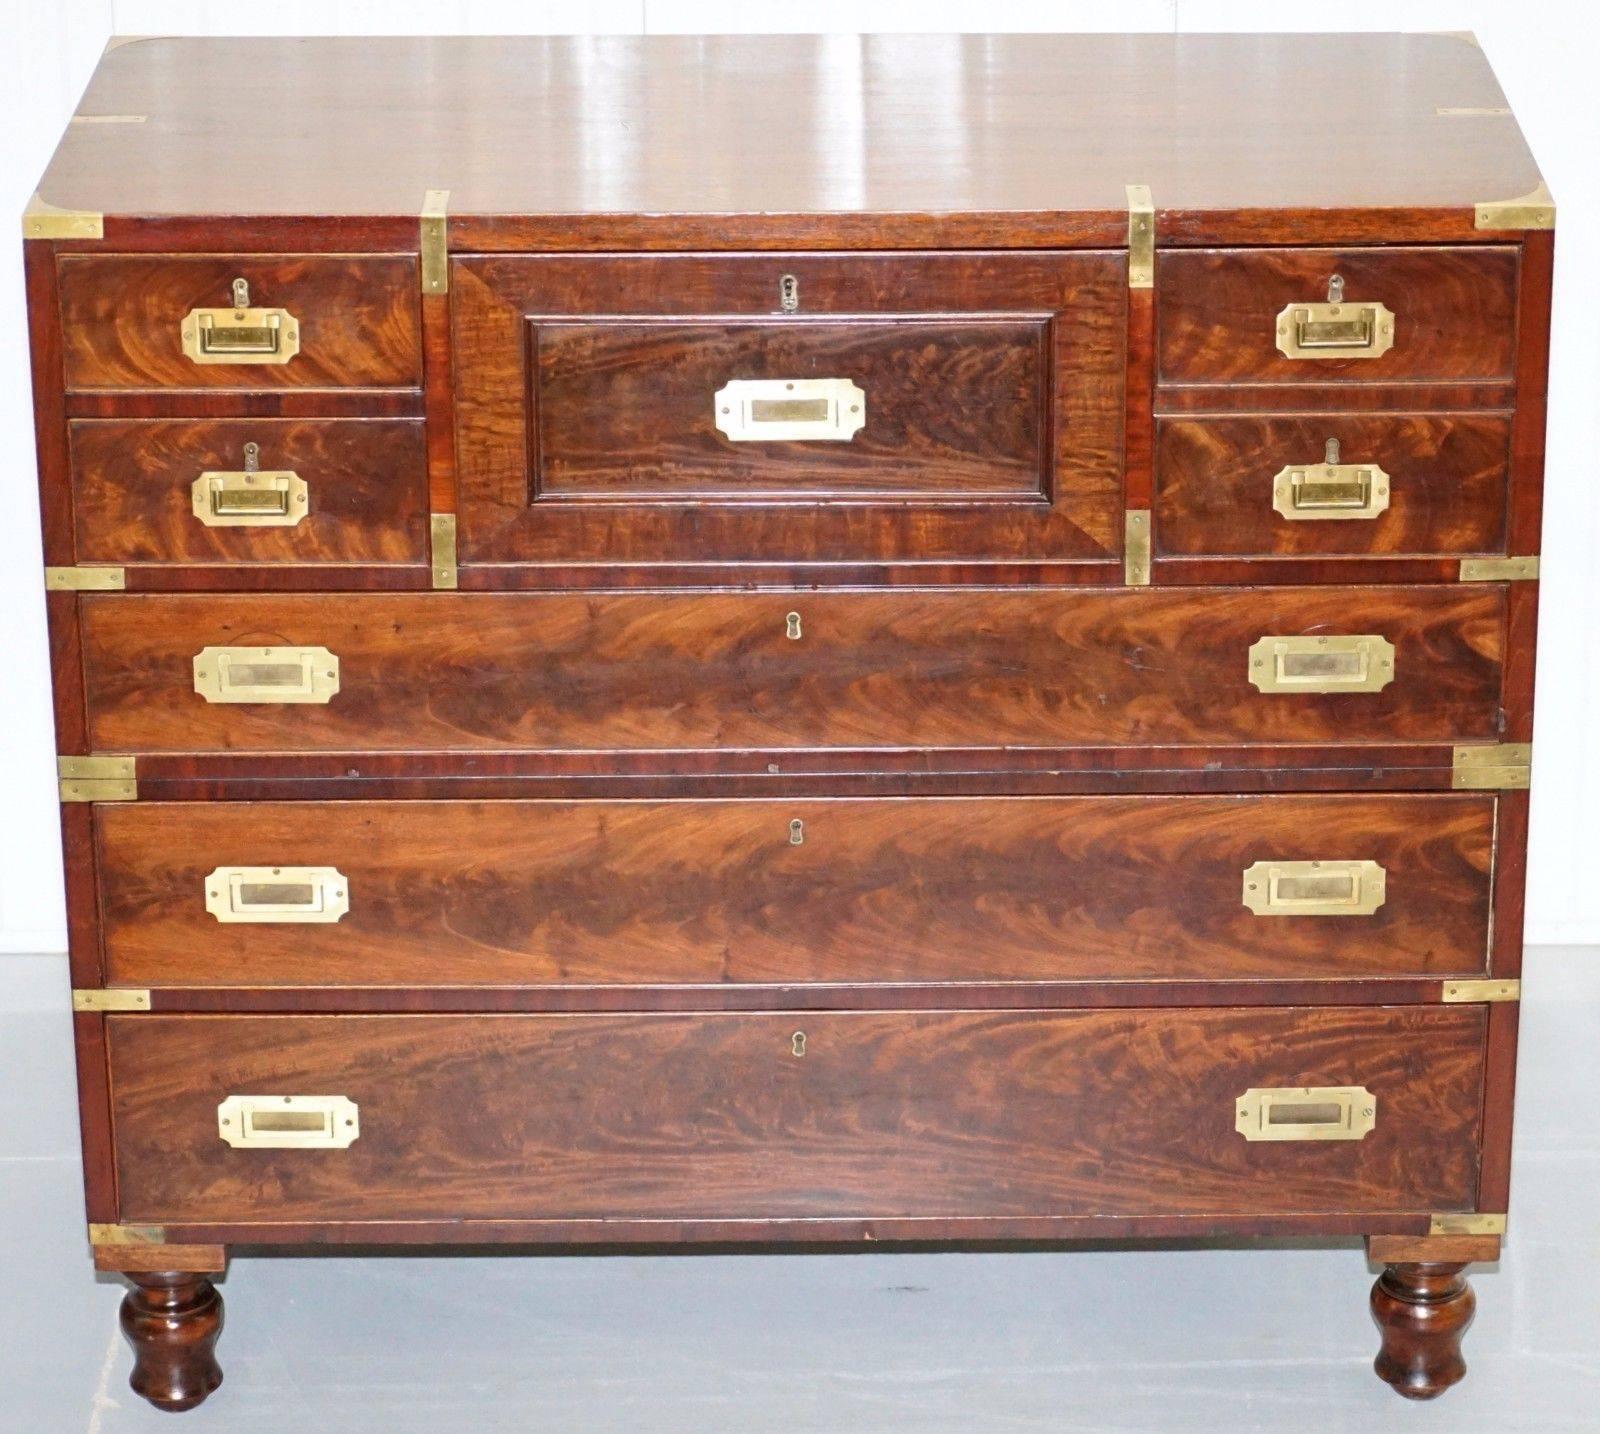 We are delighted to offer for sale this stunning original, circa 1890, flamed Military campaign chest with drop front Secretaire desk.

A very large and well-made piece in stunning lightly restored condition, this chest would have been at the top